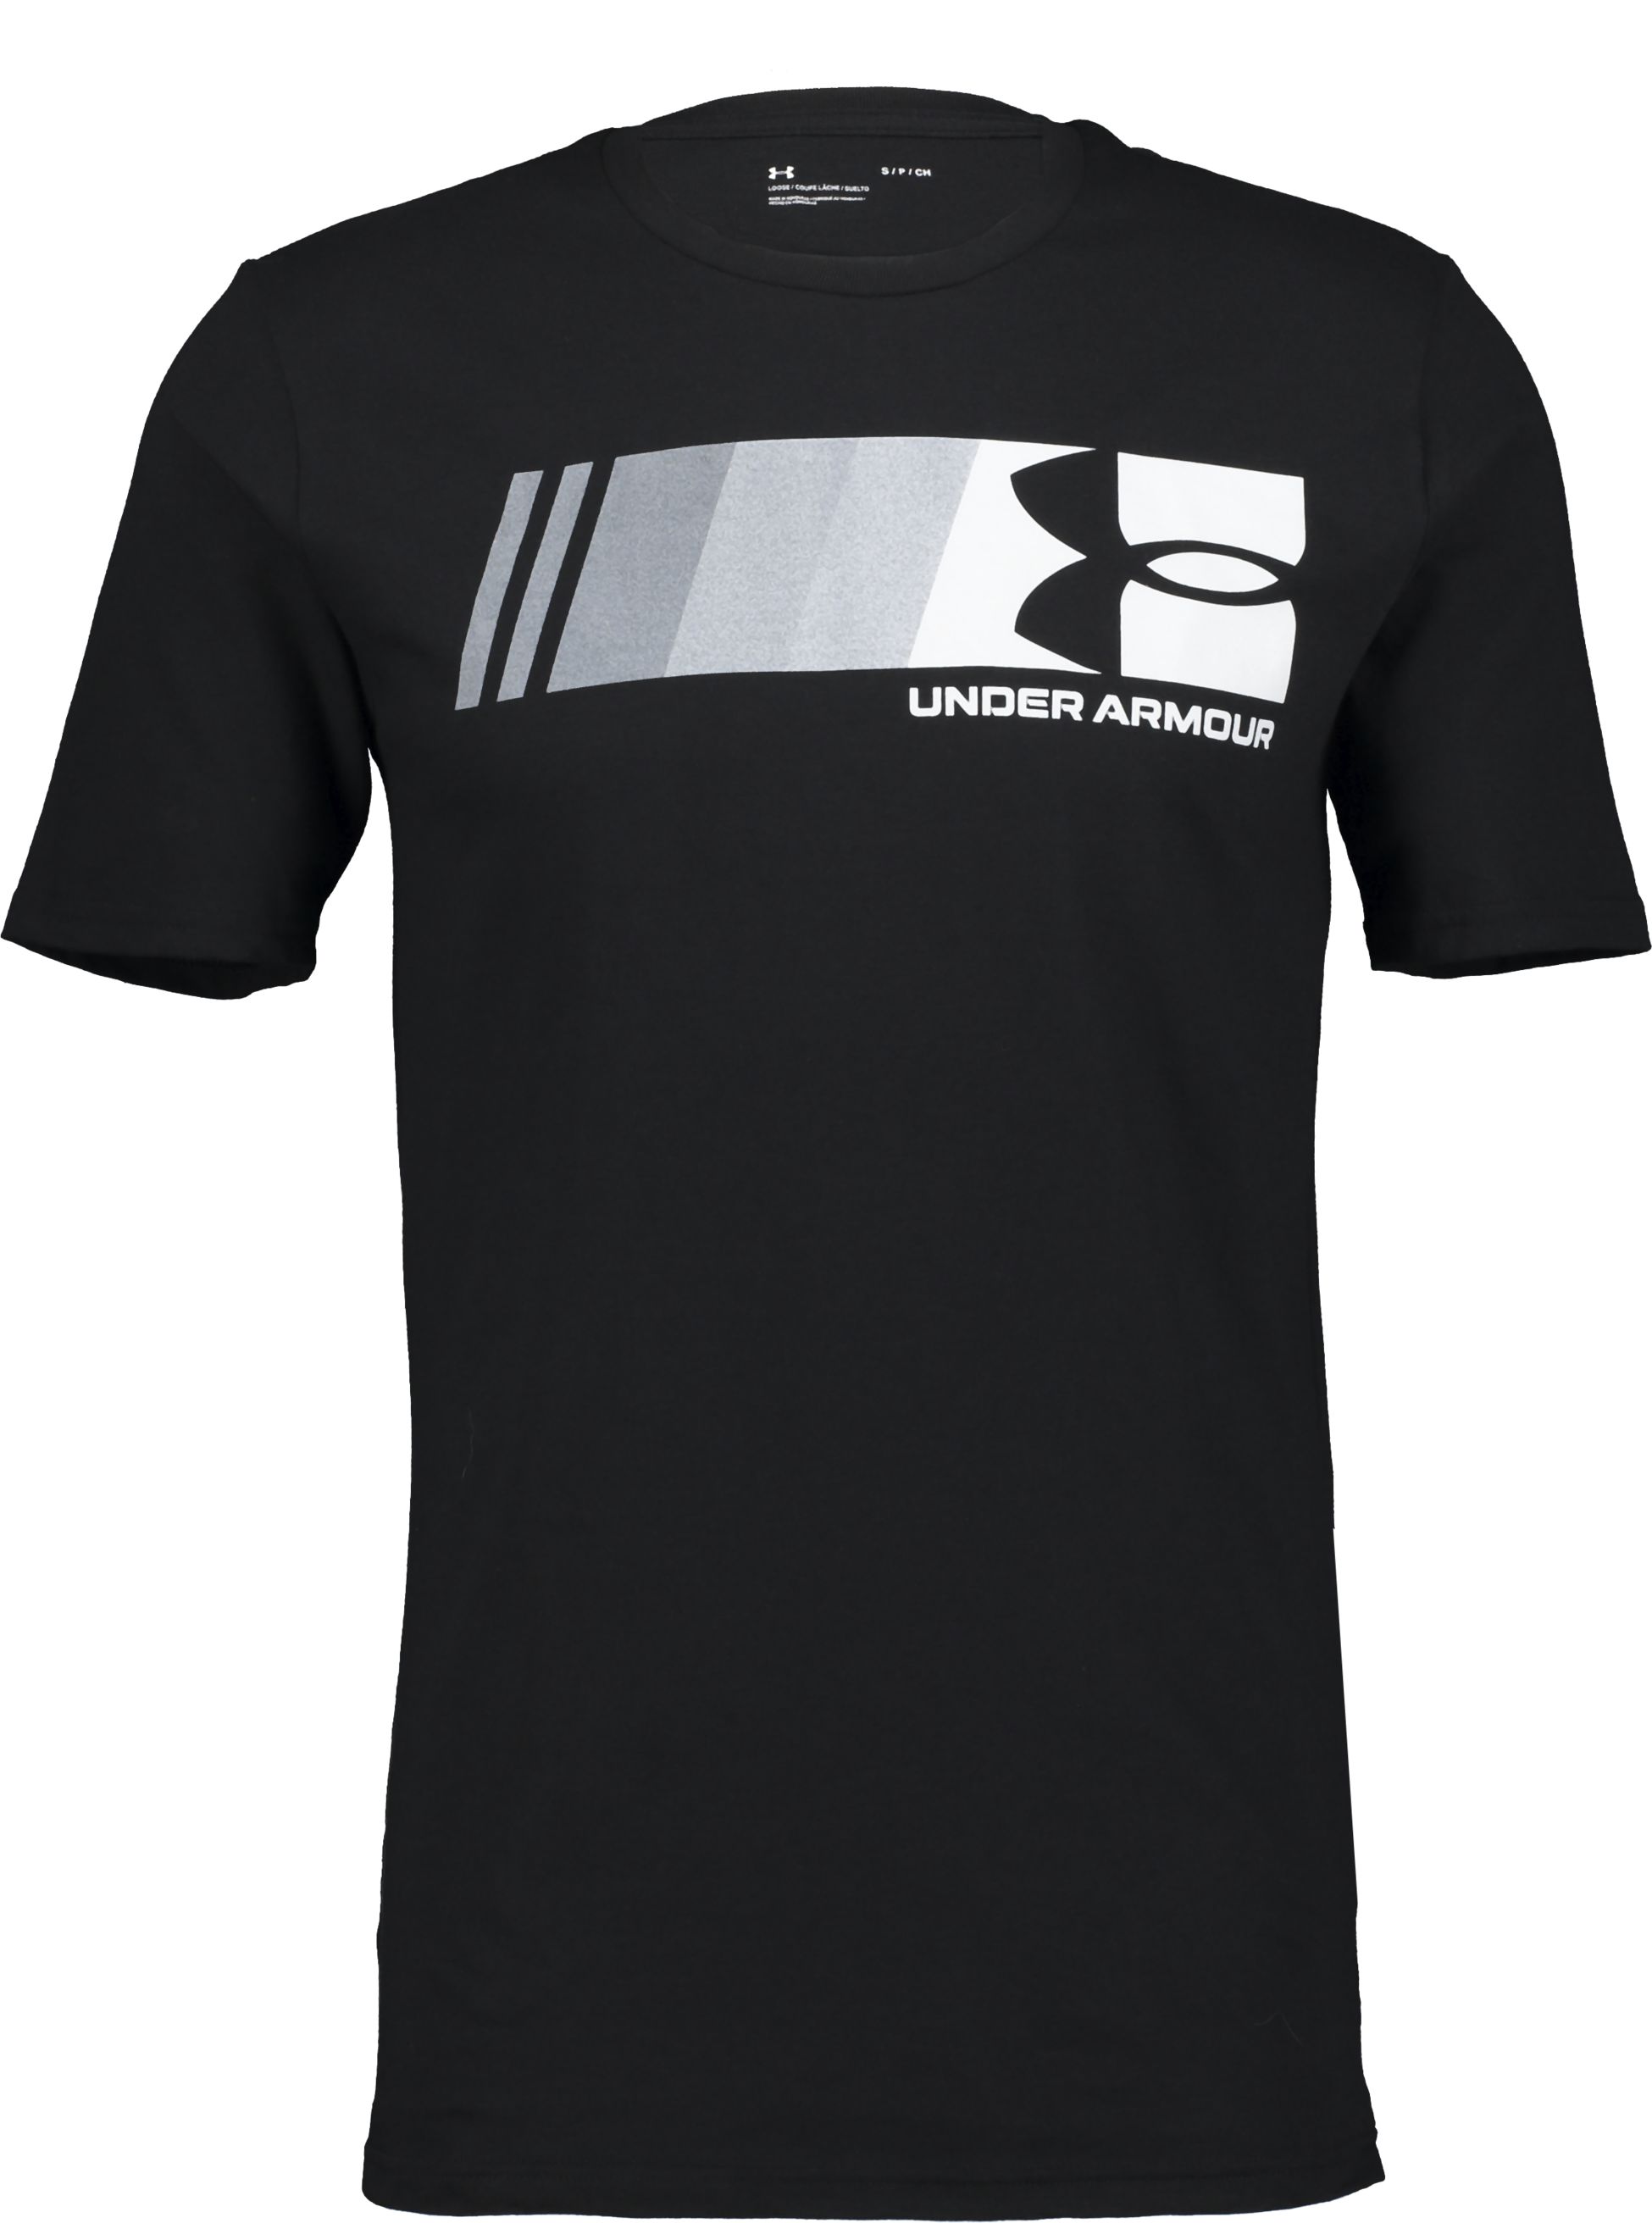 UNDER ARMOUR, UA Fast Left Chest T